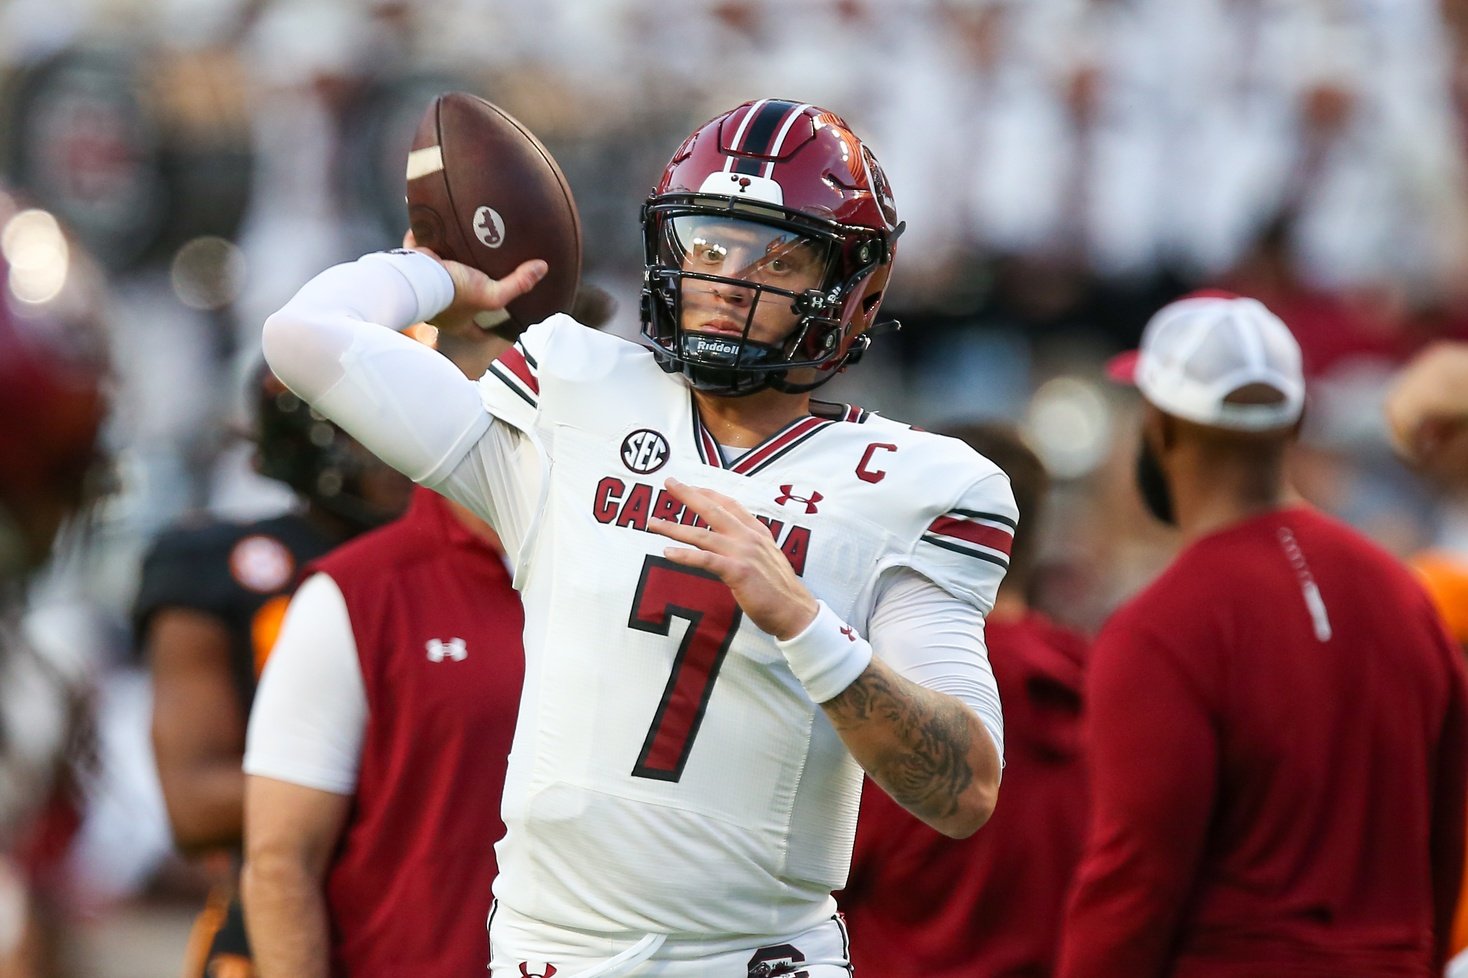 South Carolina Gamecocks QB Spencer Rattler (7) warms up before a game against the Tennessee Volunteers.